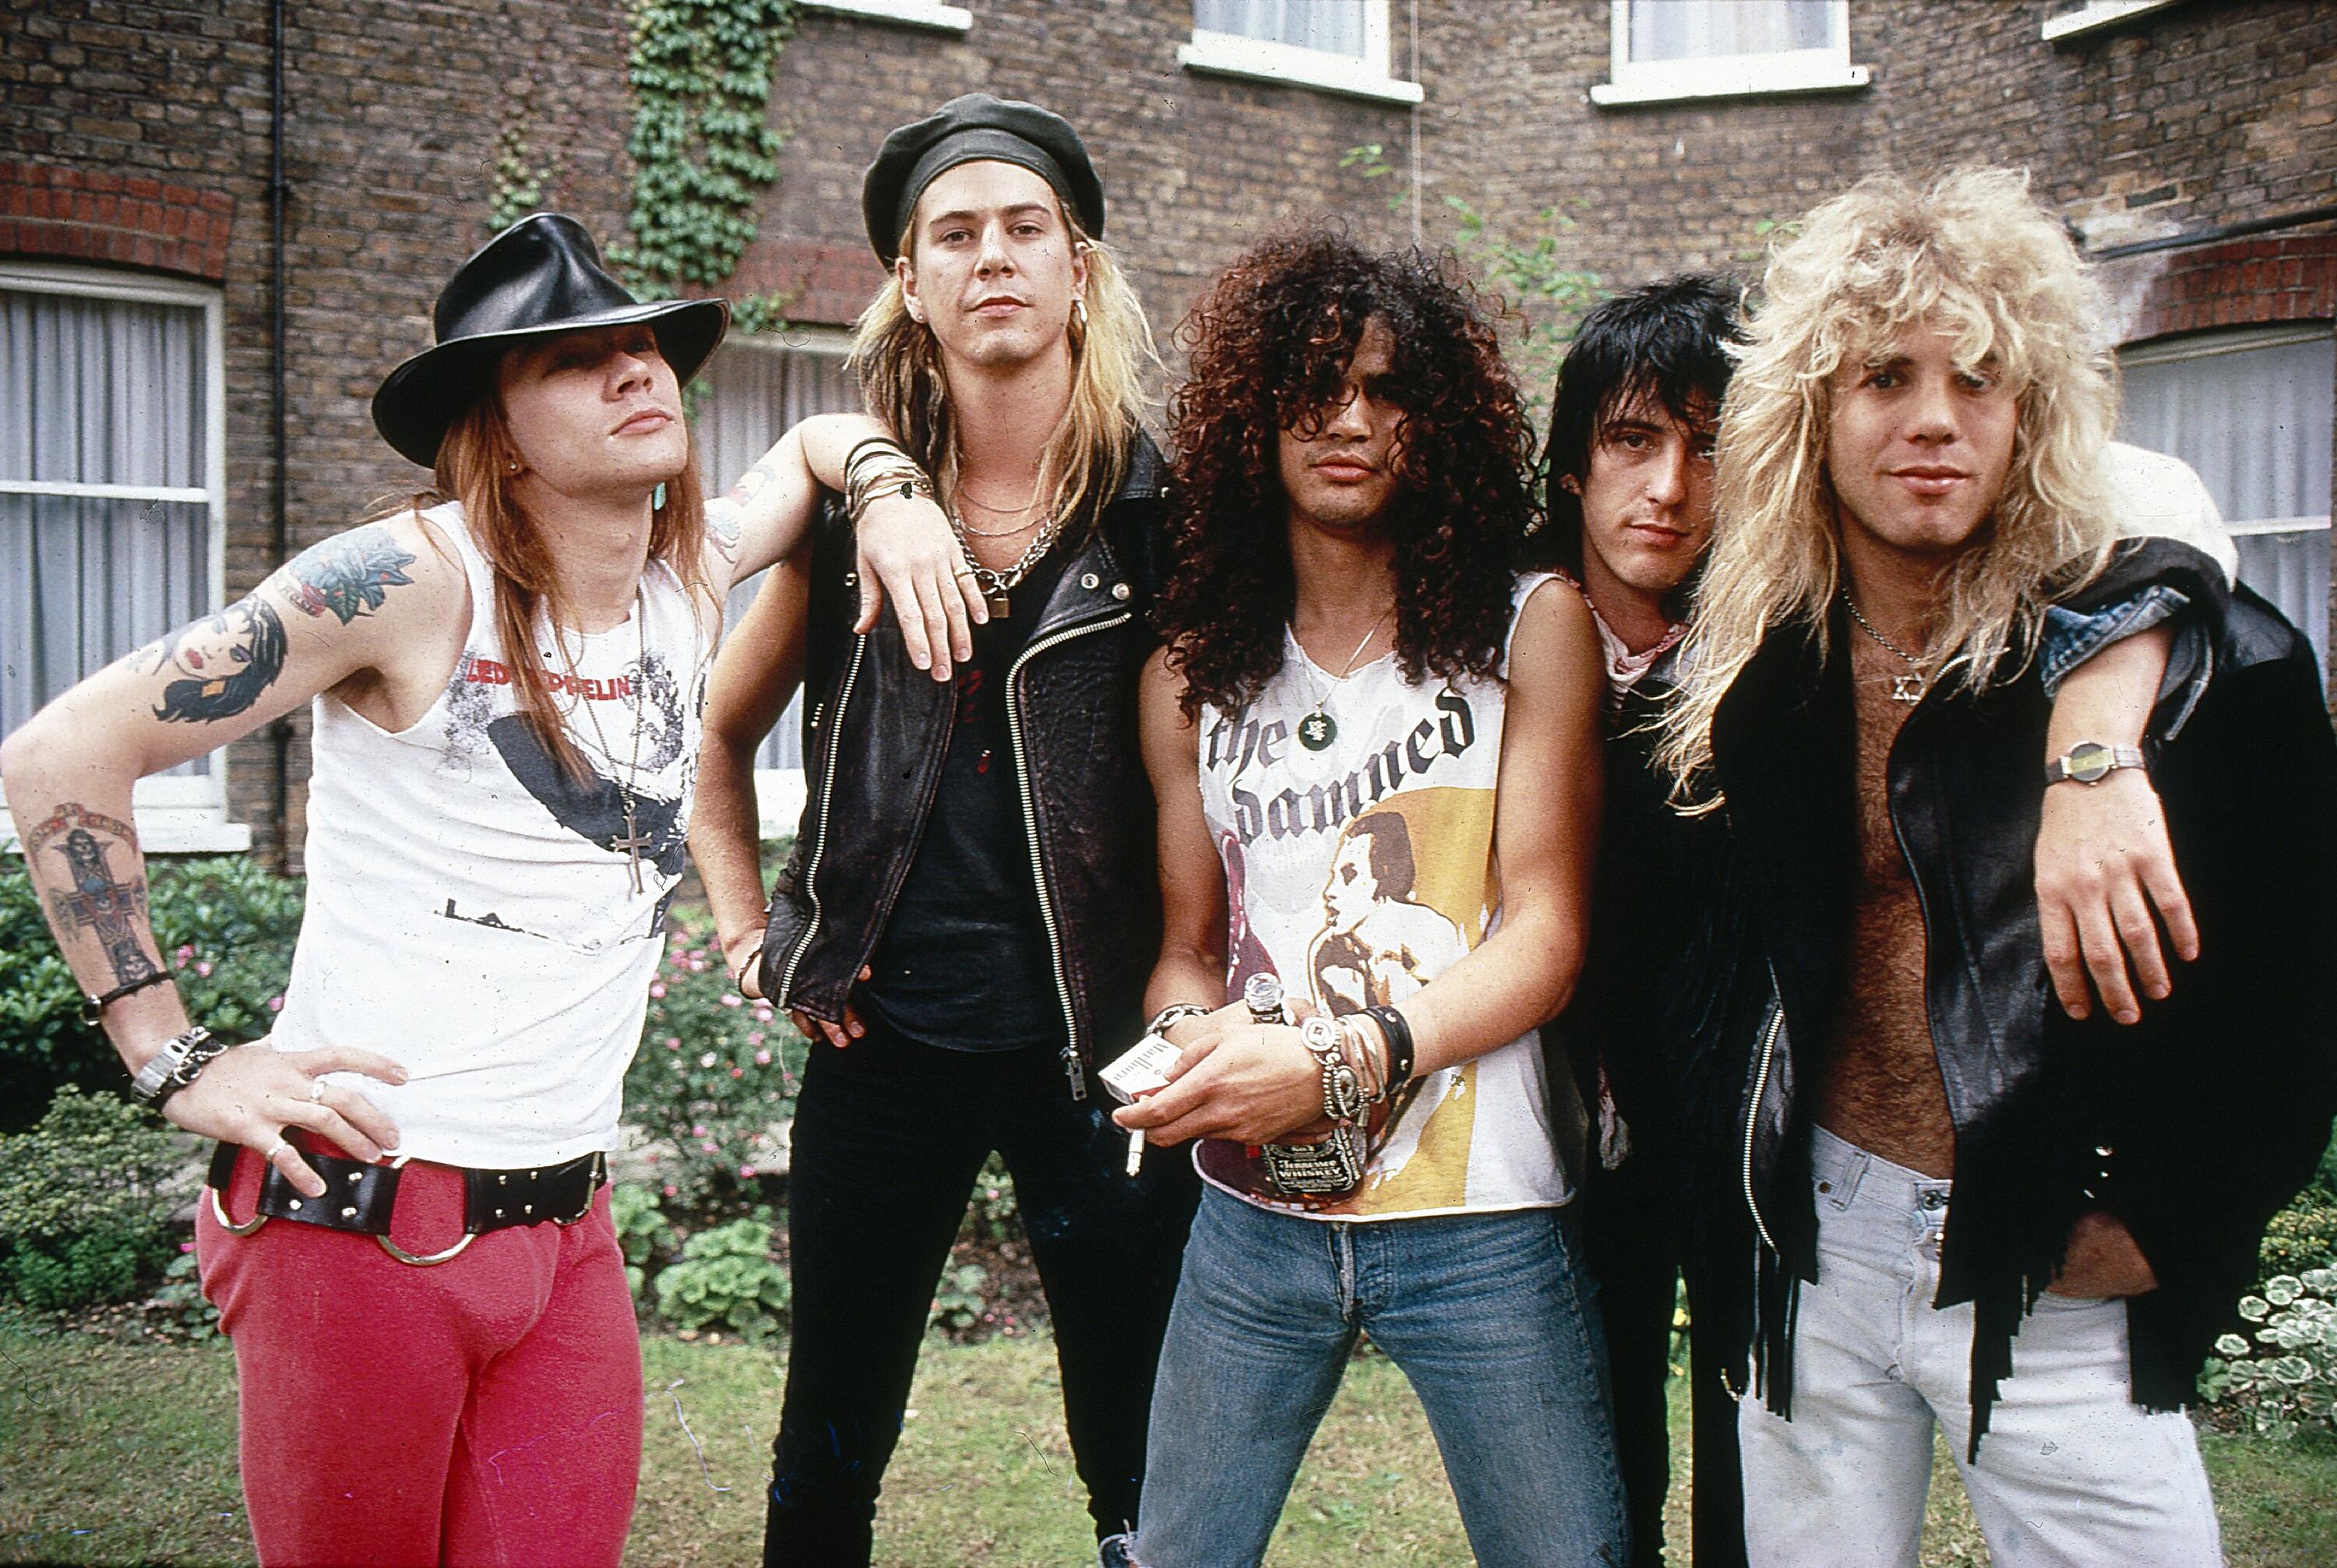 How Guns N' Roses came to redefine fashion